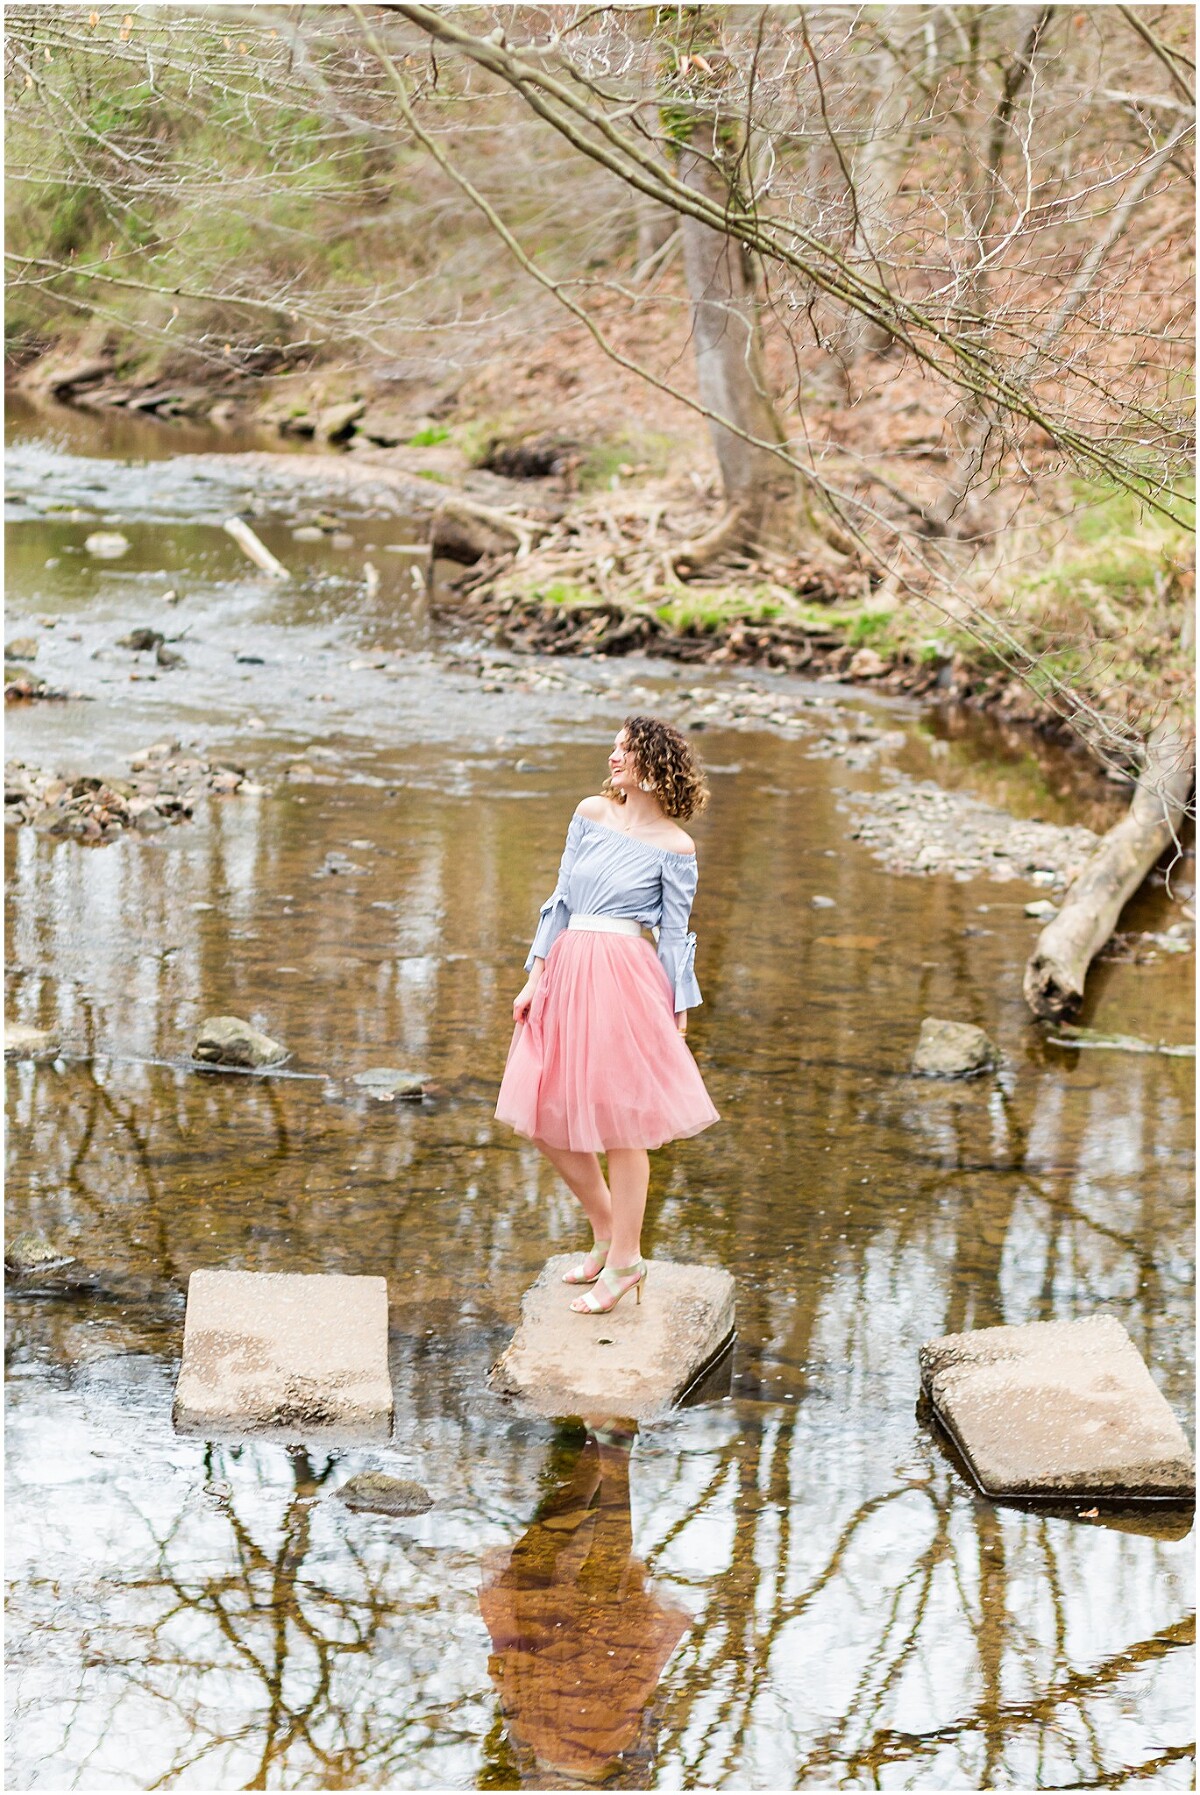 Oh my, how fun it was to photograph Matea for her high school senior session! We went to Ellanor Lawrence Park in Fairfax, Virginia, and had a lovely time on their footbridge and splashing around in the little stream underneath. They also had a beautiful tulip magnolia tree that we took some photos under! Click the link to see her FULL SPRING SENIOR SESSION! Photo by Bethanie Vetter Photography LLC. Website: bethanievetter.com #springseniorphotos #seniorphotos #virginiasenior #seniorportraits #springphotos #springflowers #footbridge #footbridgephotos #eclawrence #eclawrencepark #waterphotosession #stream #riverphotos #springseniorphotos #springsenior #floralsesssion #floralphotos #flowercrown #bethanievetterportraits #bethanievetterphotography #curlyhair #curlygirl #tulipmagnolia #tulipmagnoliatree #tulleskirt